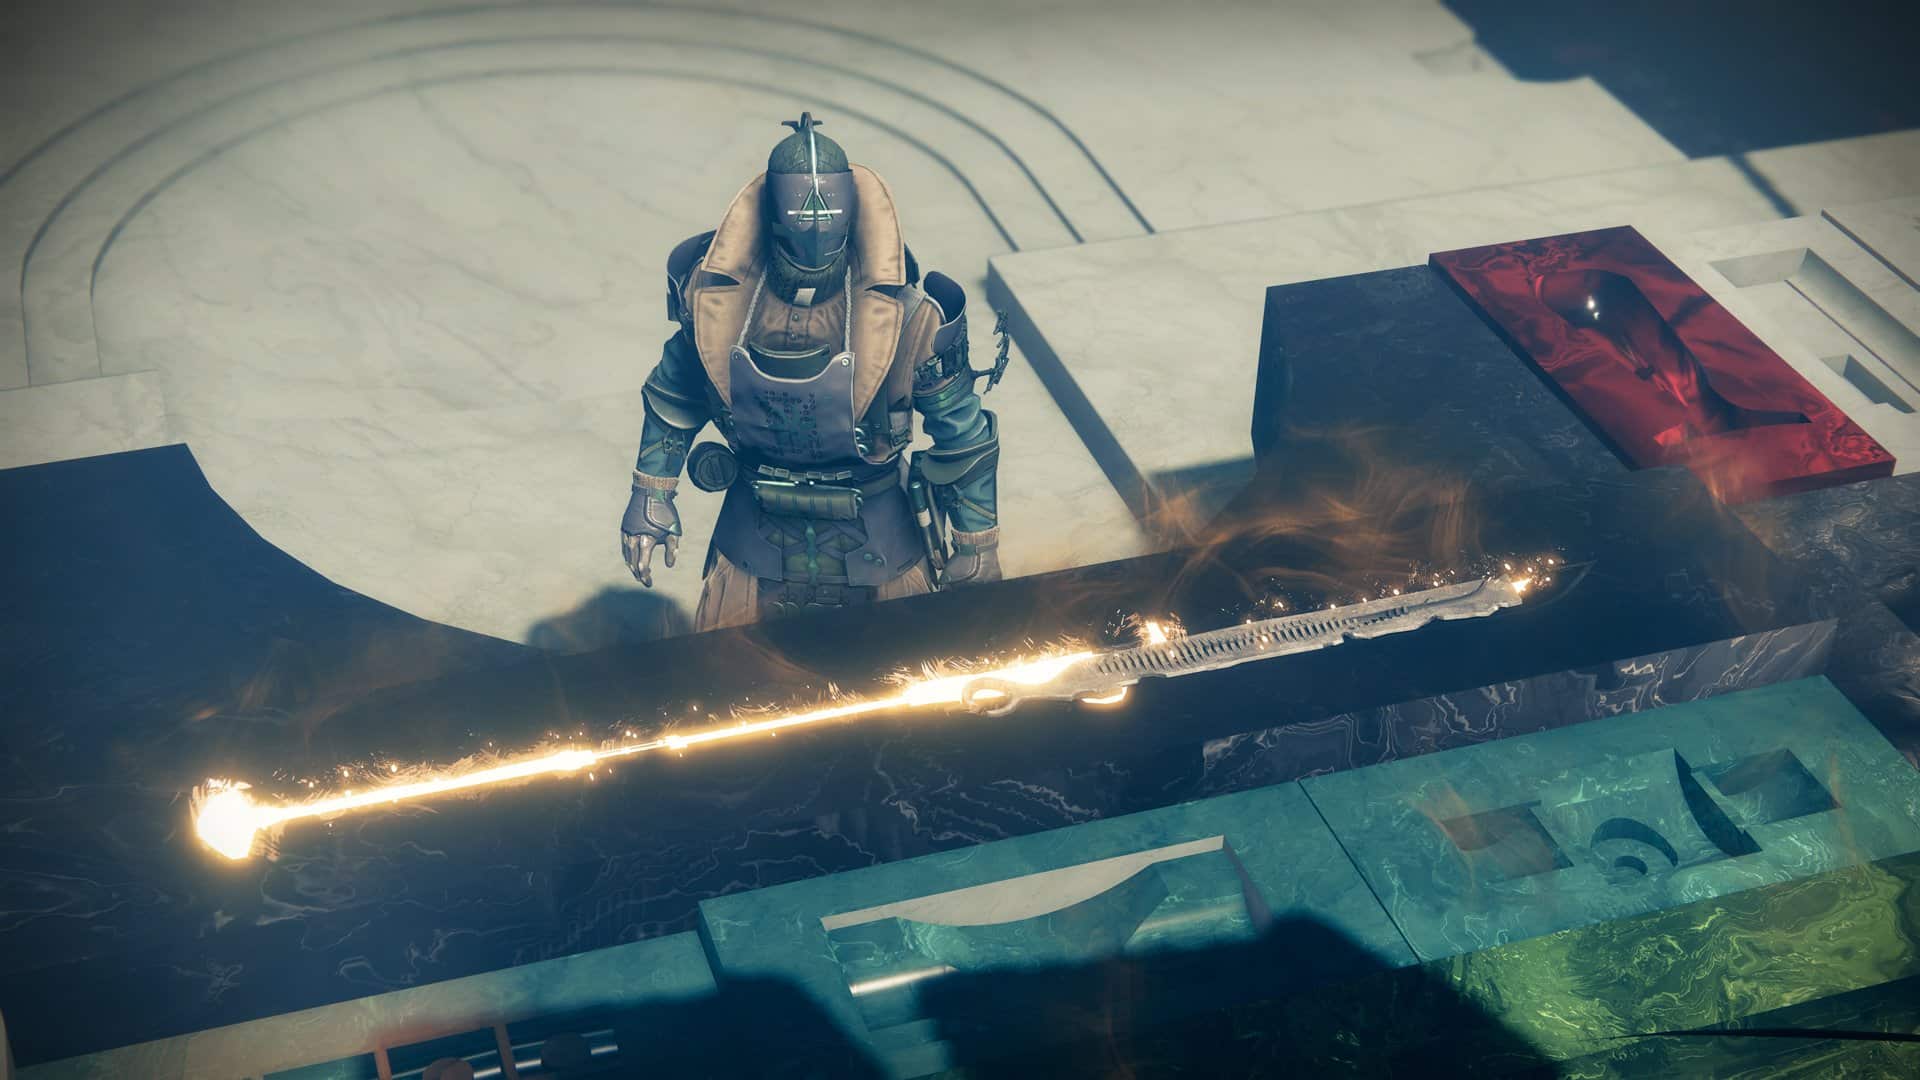 Destiny 2 cinematic screenshot showing a Guardian crafting a weapon